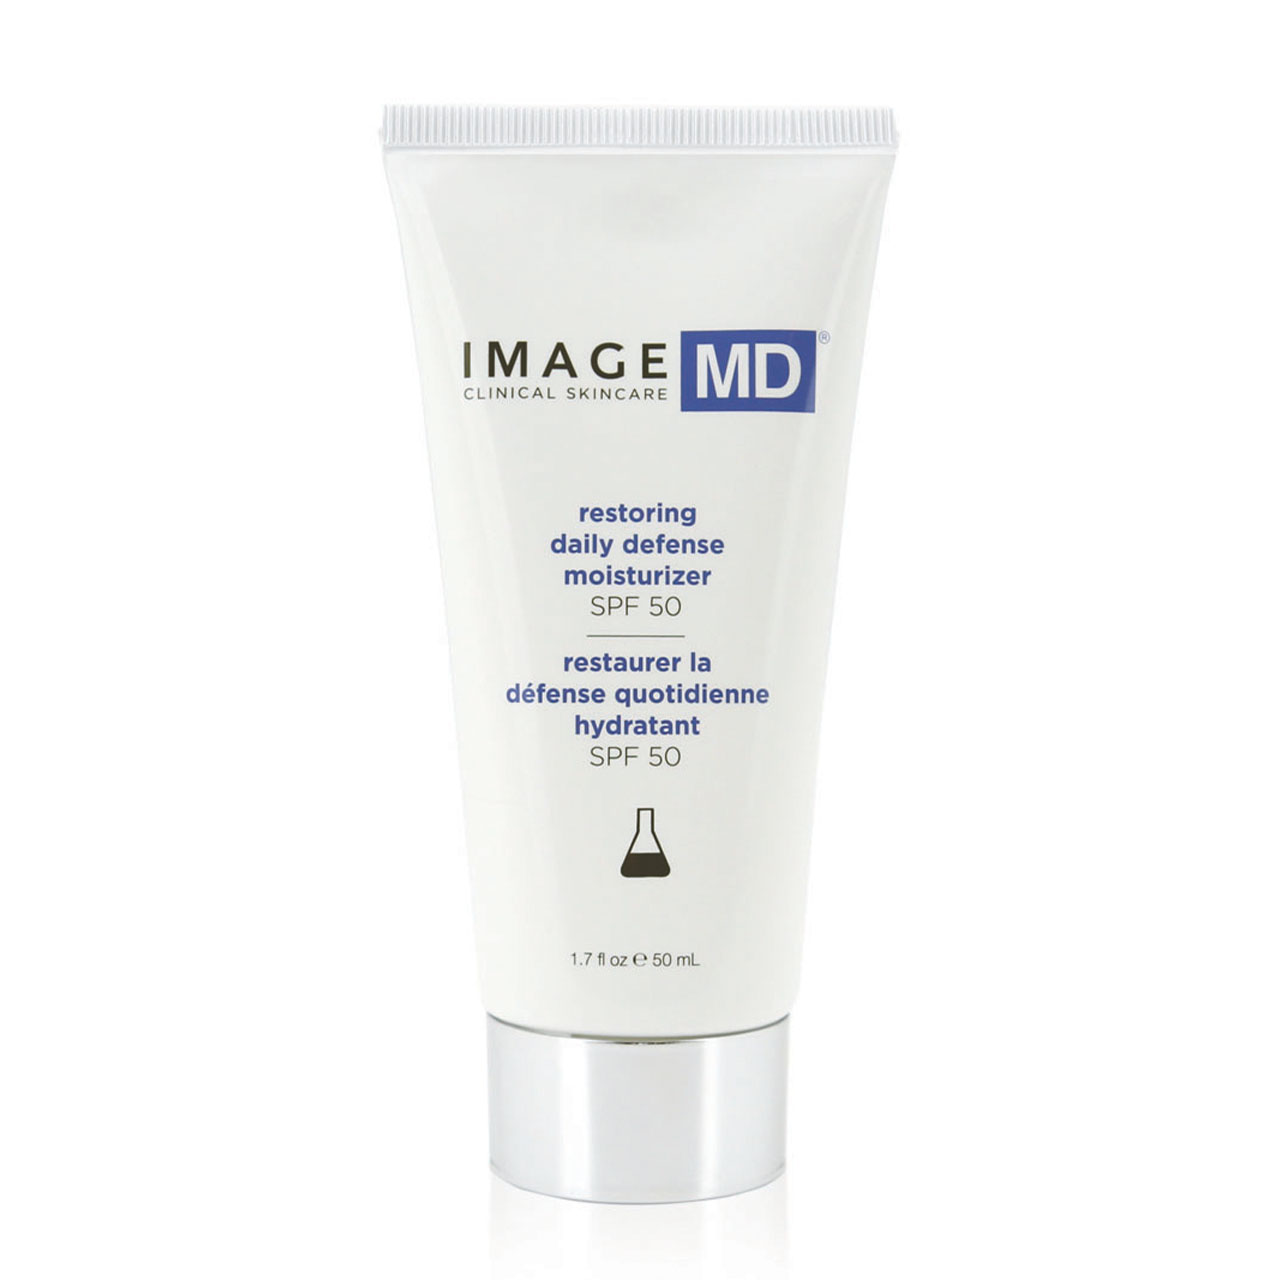 Image Skincare IMAGE MD Restoring Daily Defense Moisturizer SPF 50 (New Formula) - 2 oz (MD-223) (016903) Questions & Answers